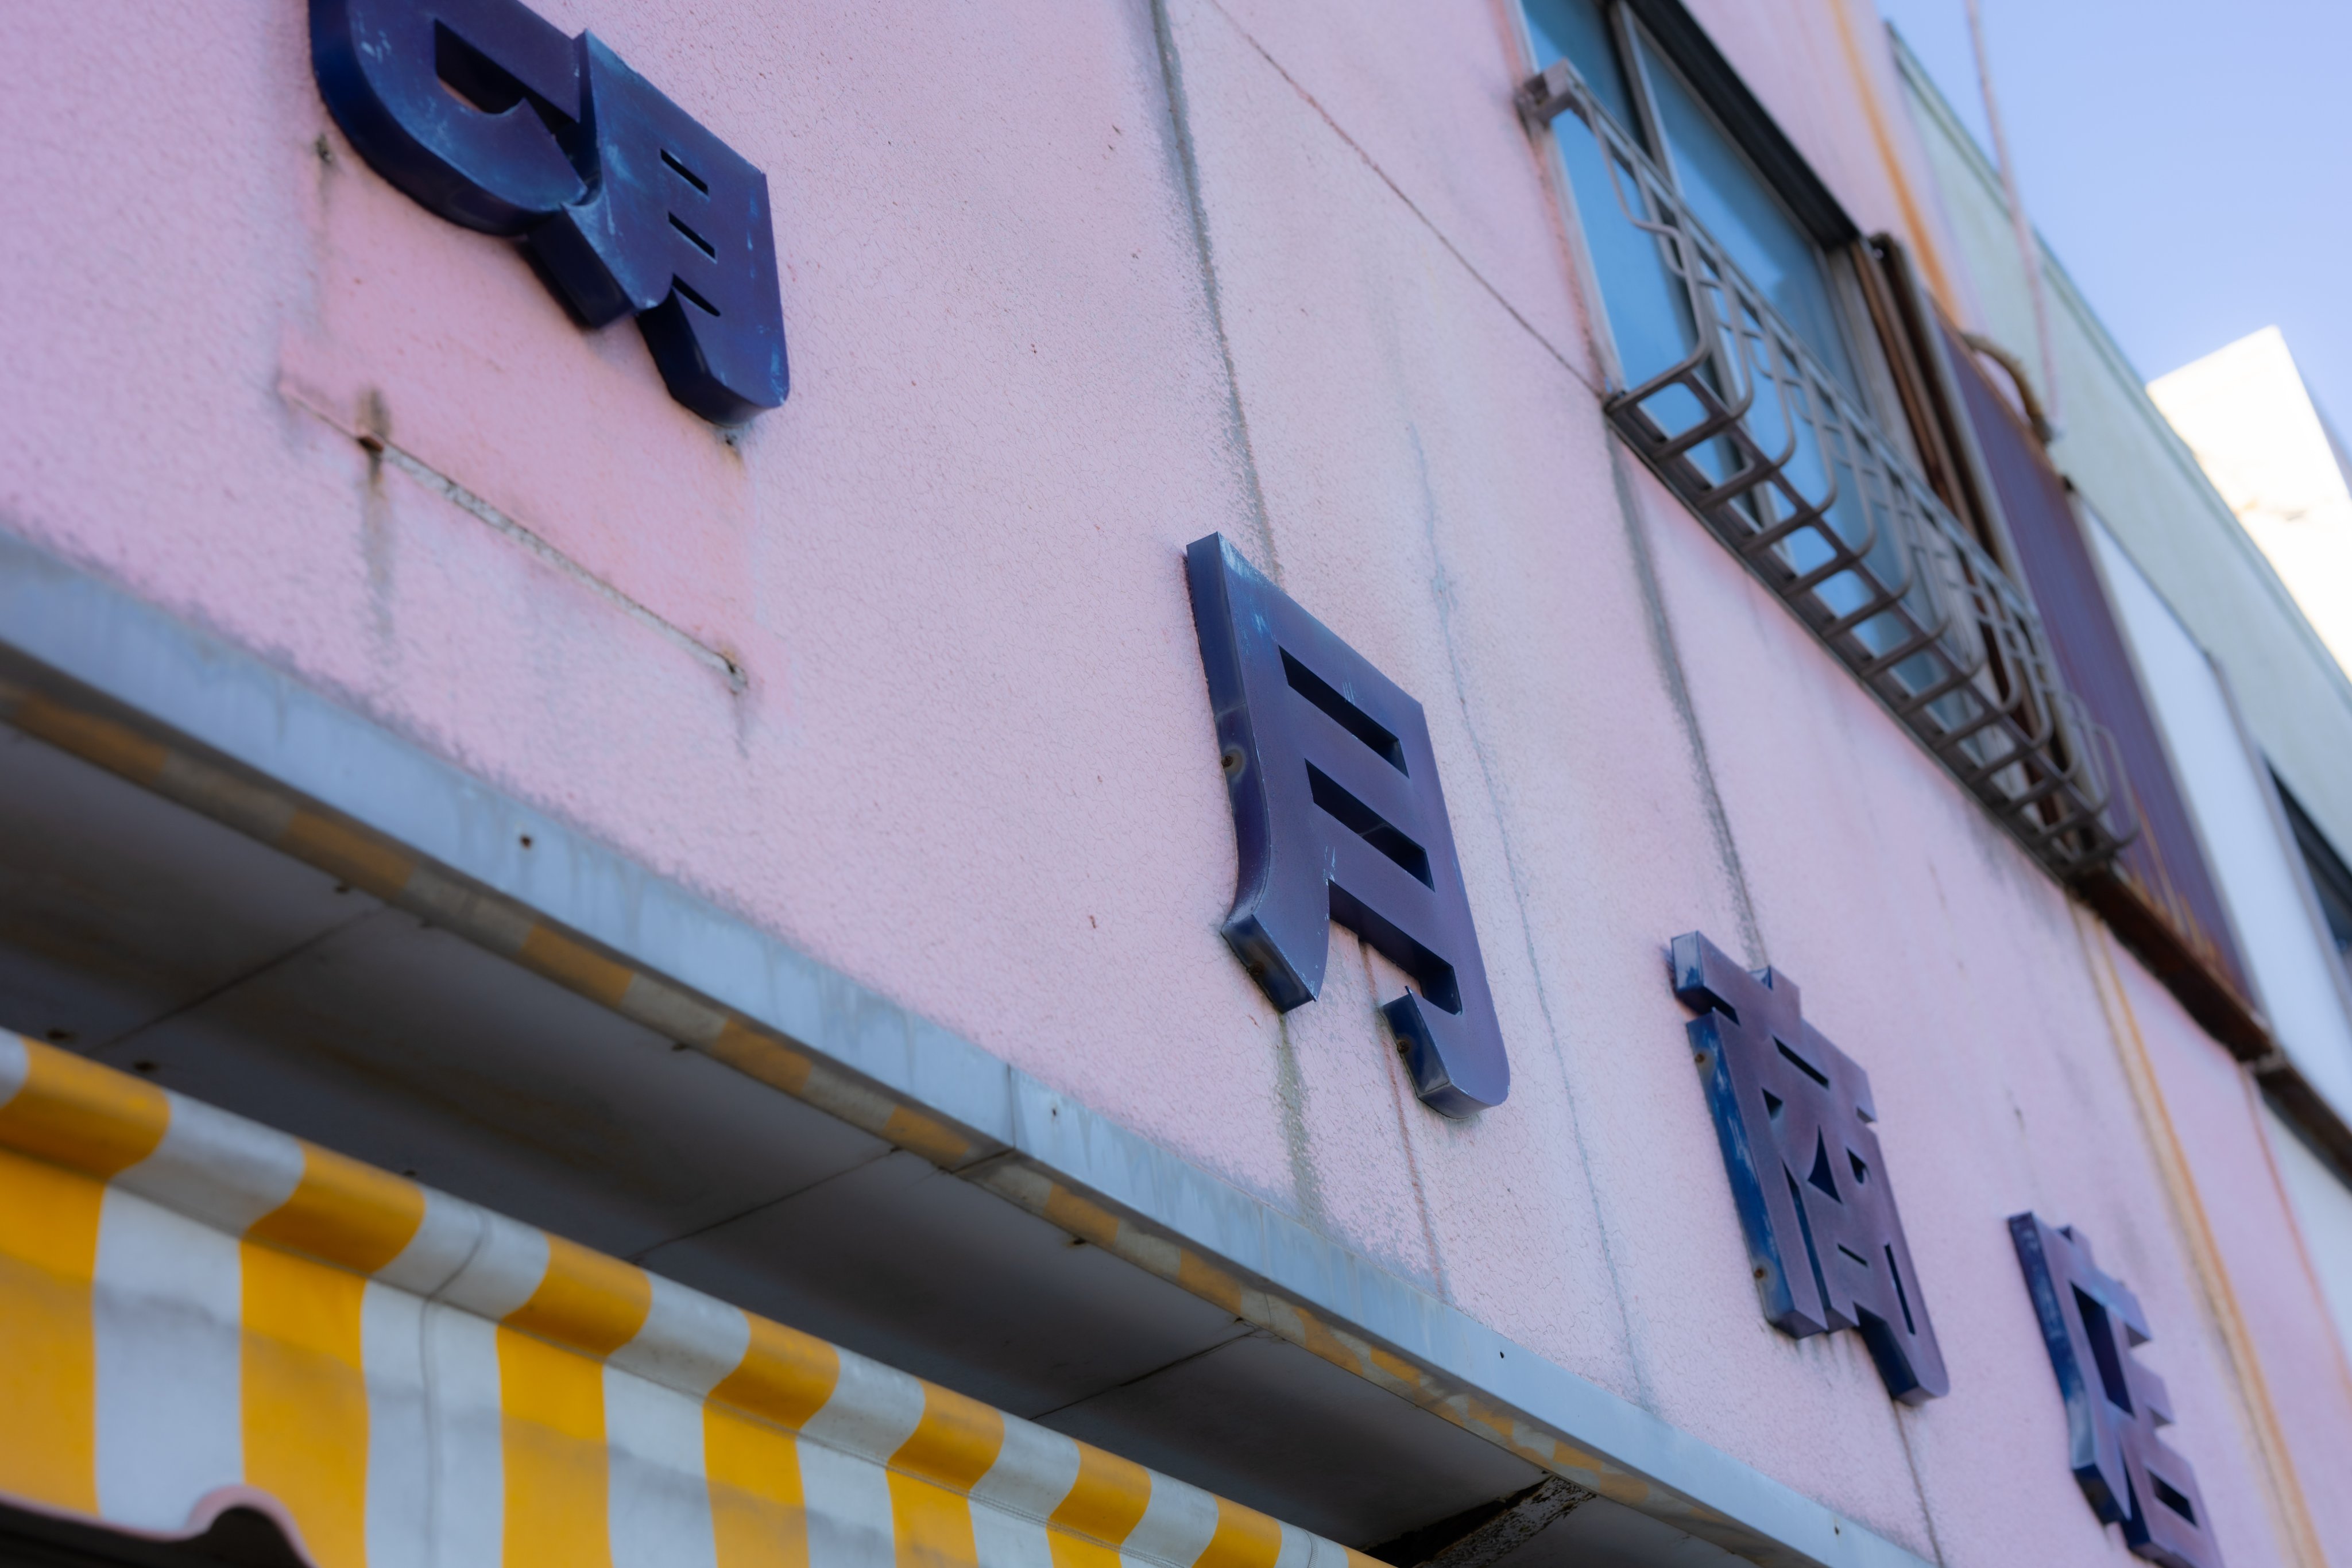 General 4096x2731 photography Japan Japanese characters kanji old building building closeup architecture